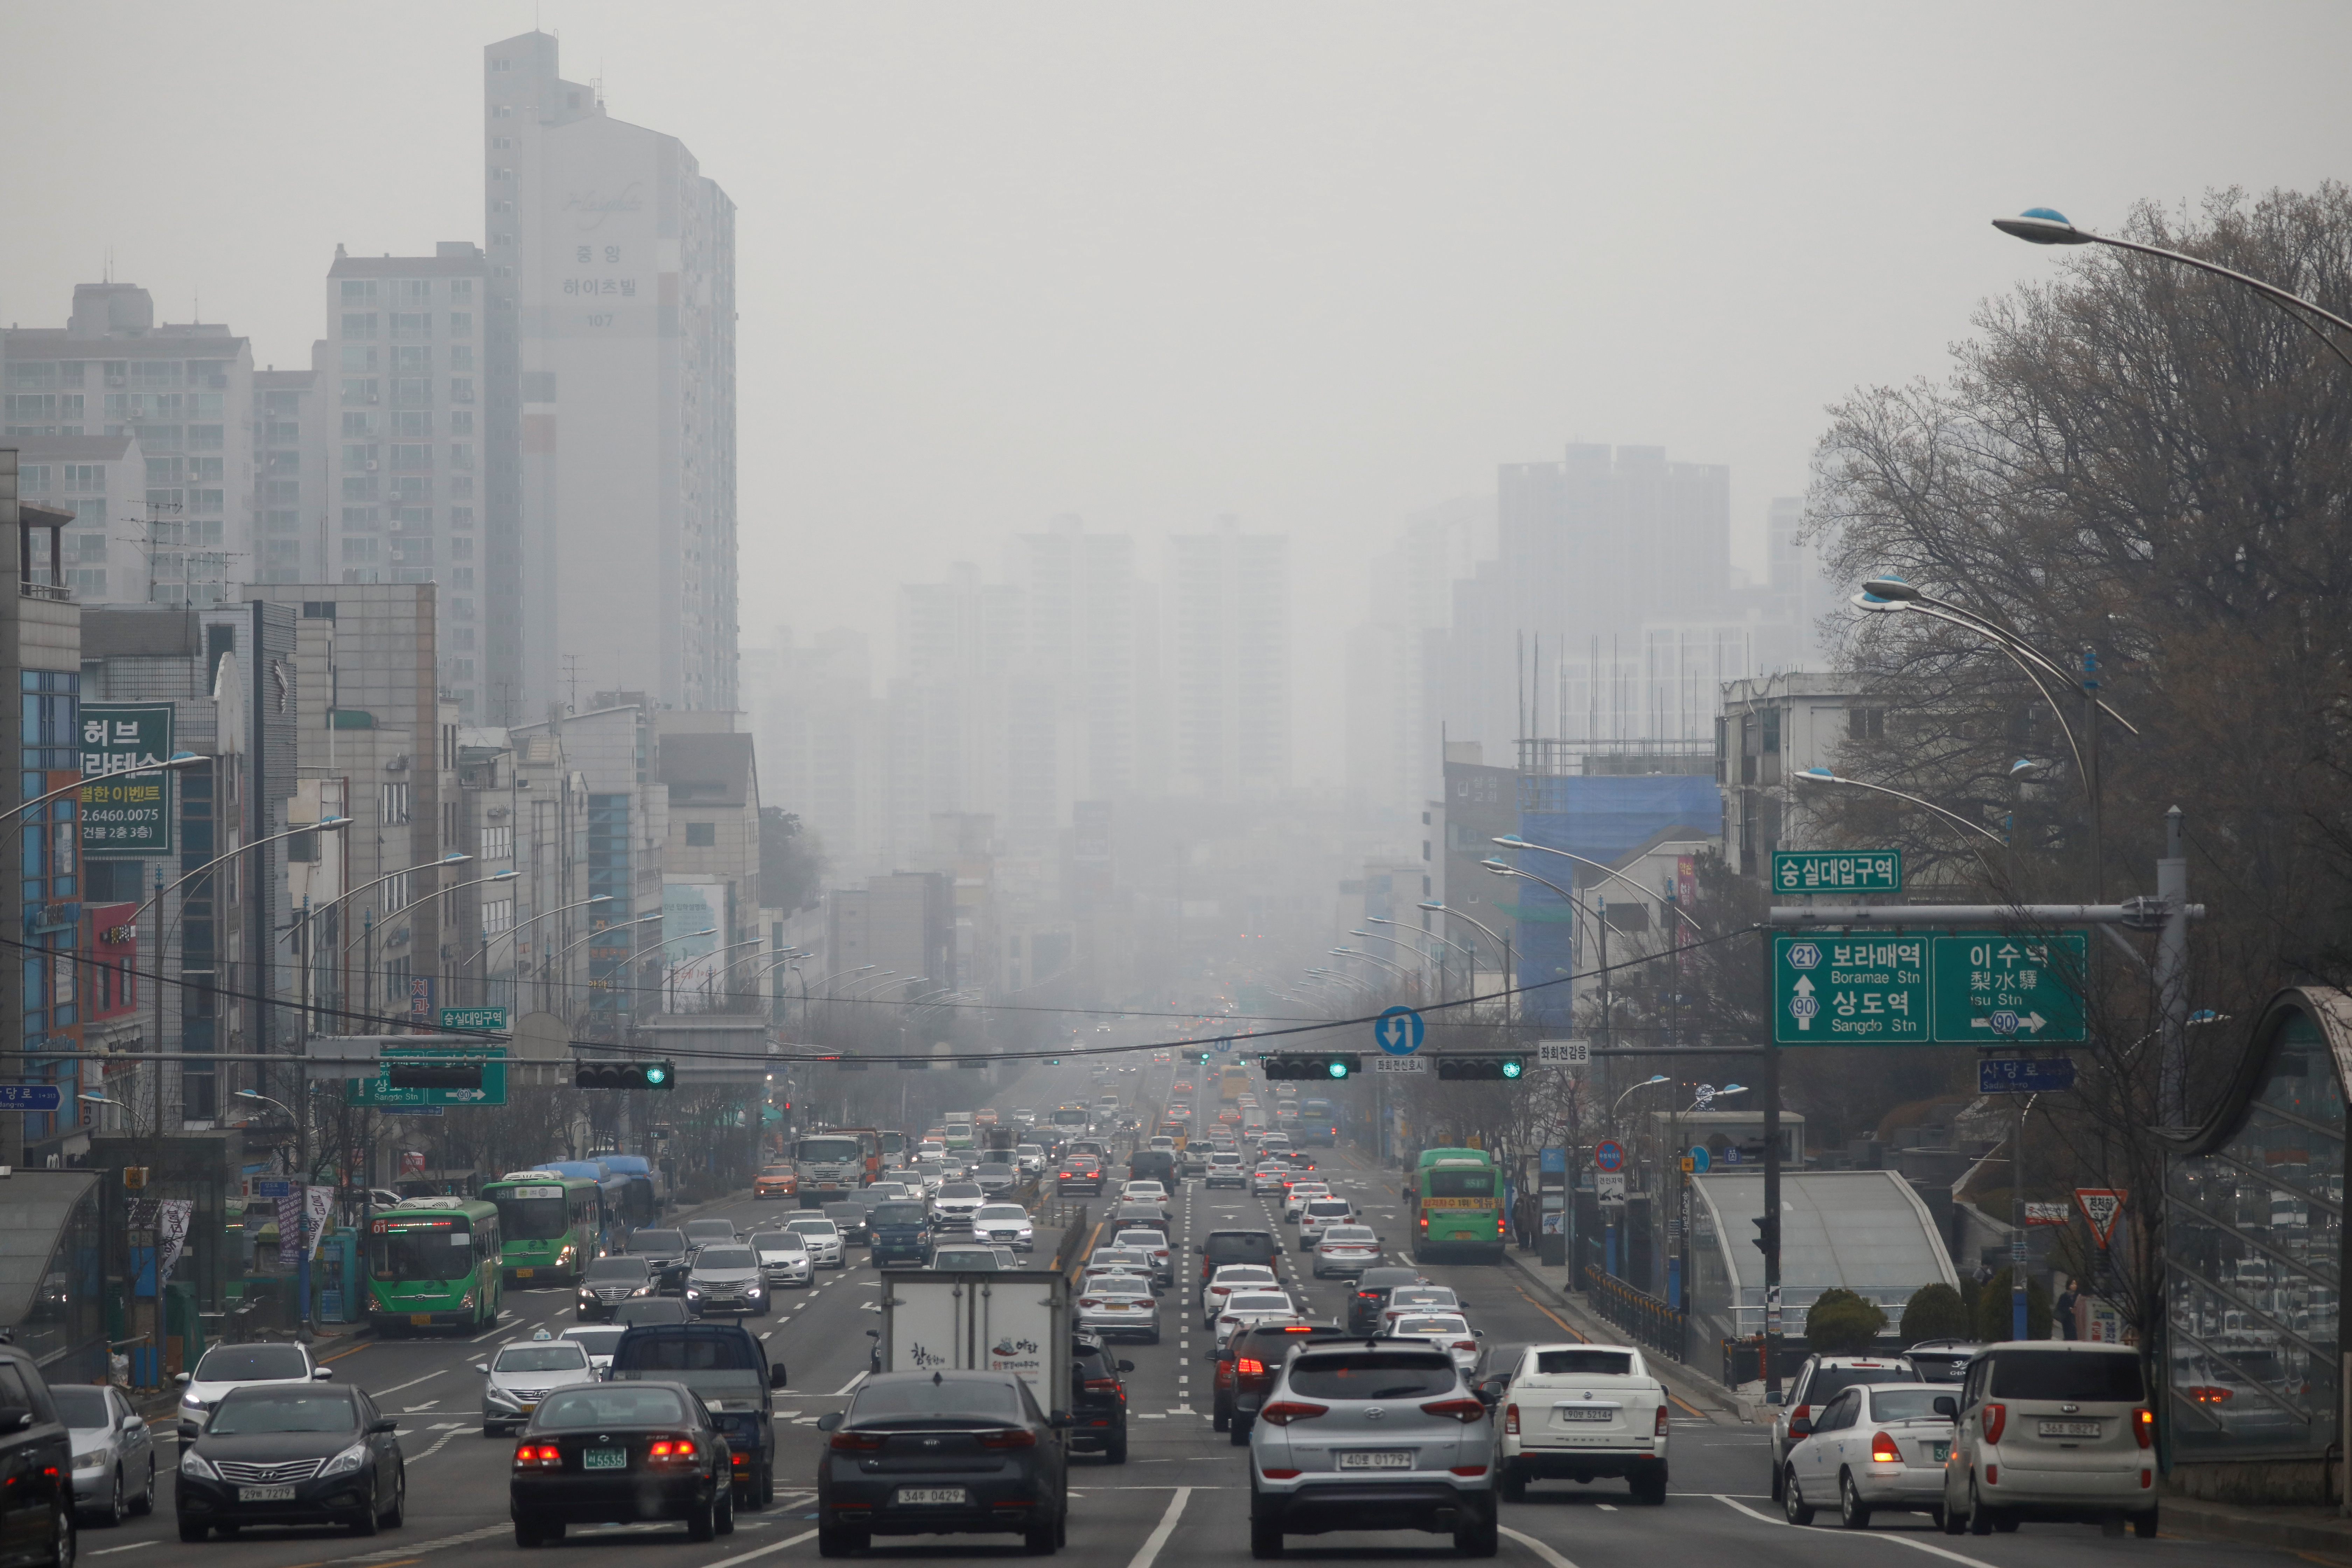 Vehicles move on a road on a polluted day in Seoul, South Korea, March 12, 2019. Picture taken on March 12, 2019.  REUTERS/Kim Hong-ji